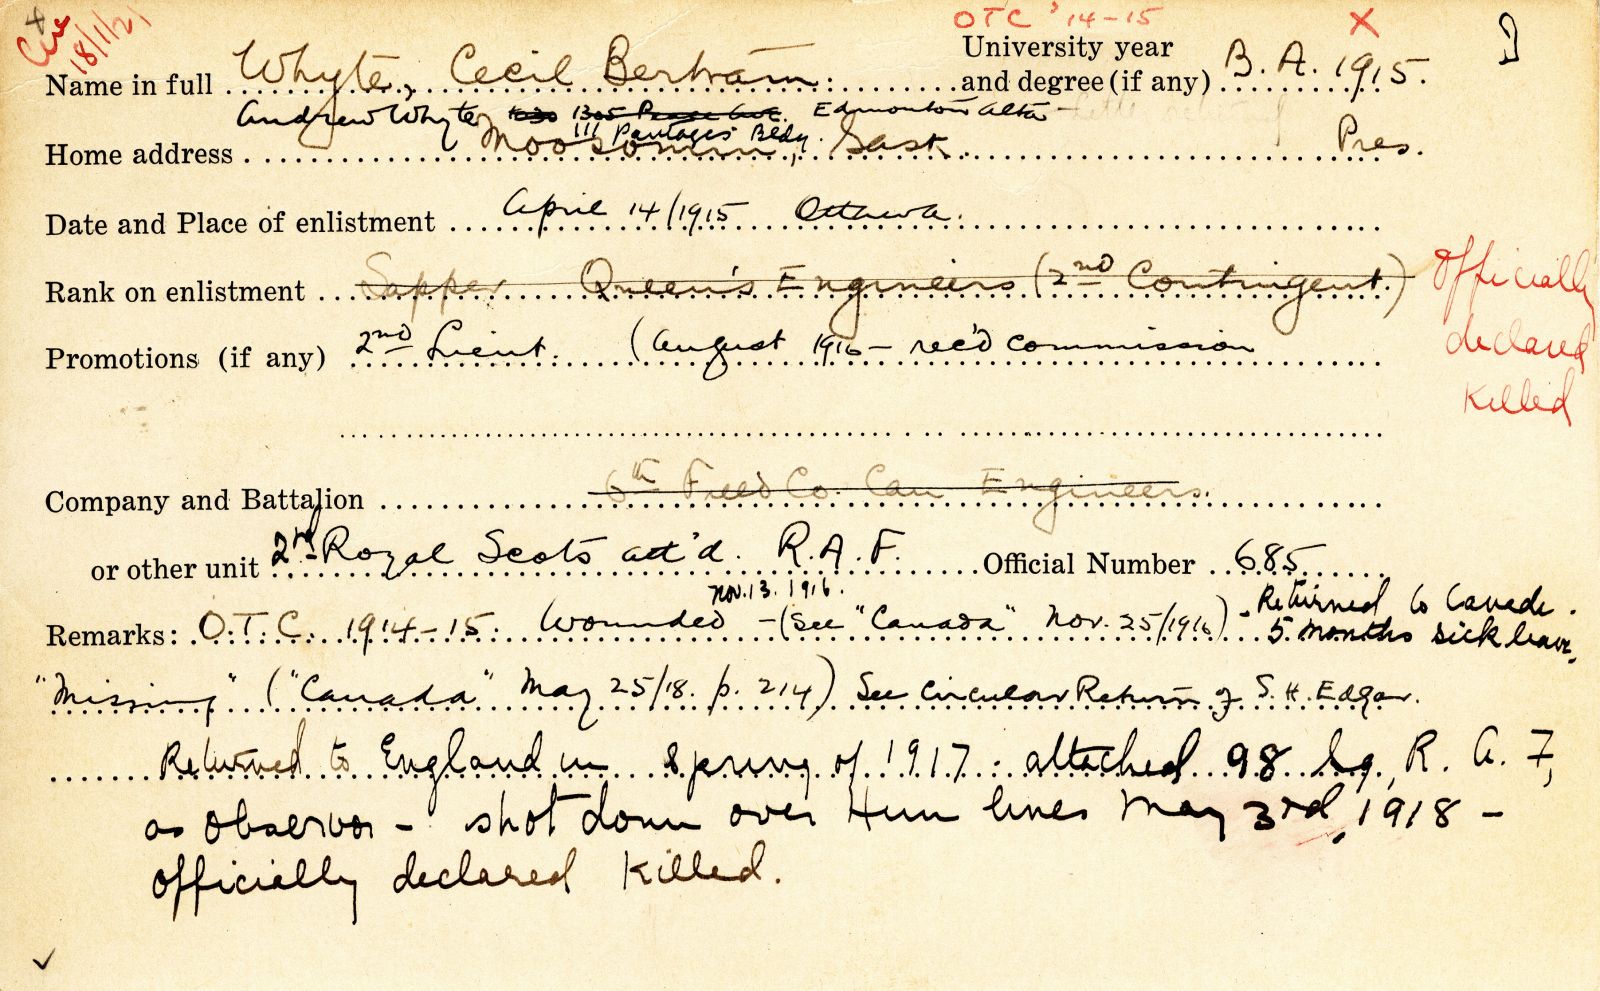 University Military Service Record of Whyte